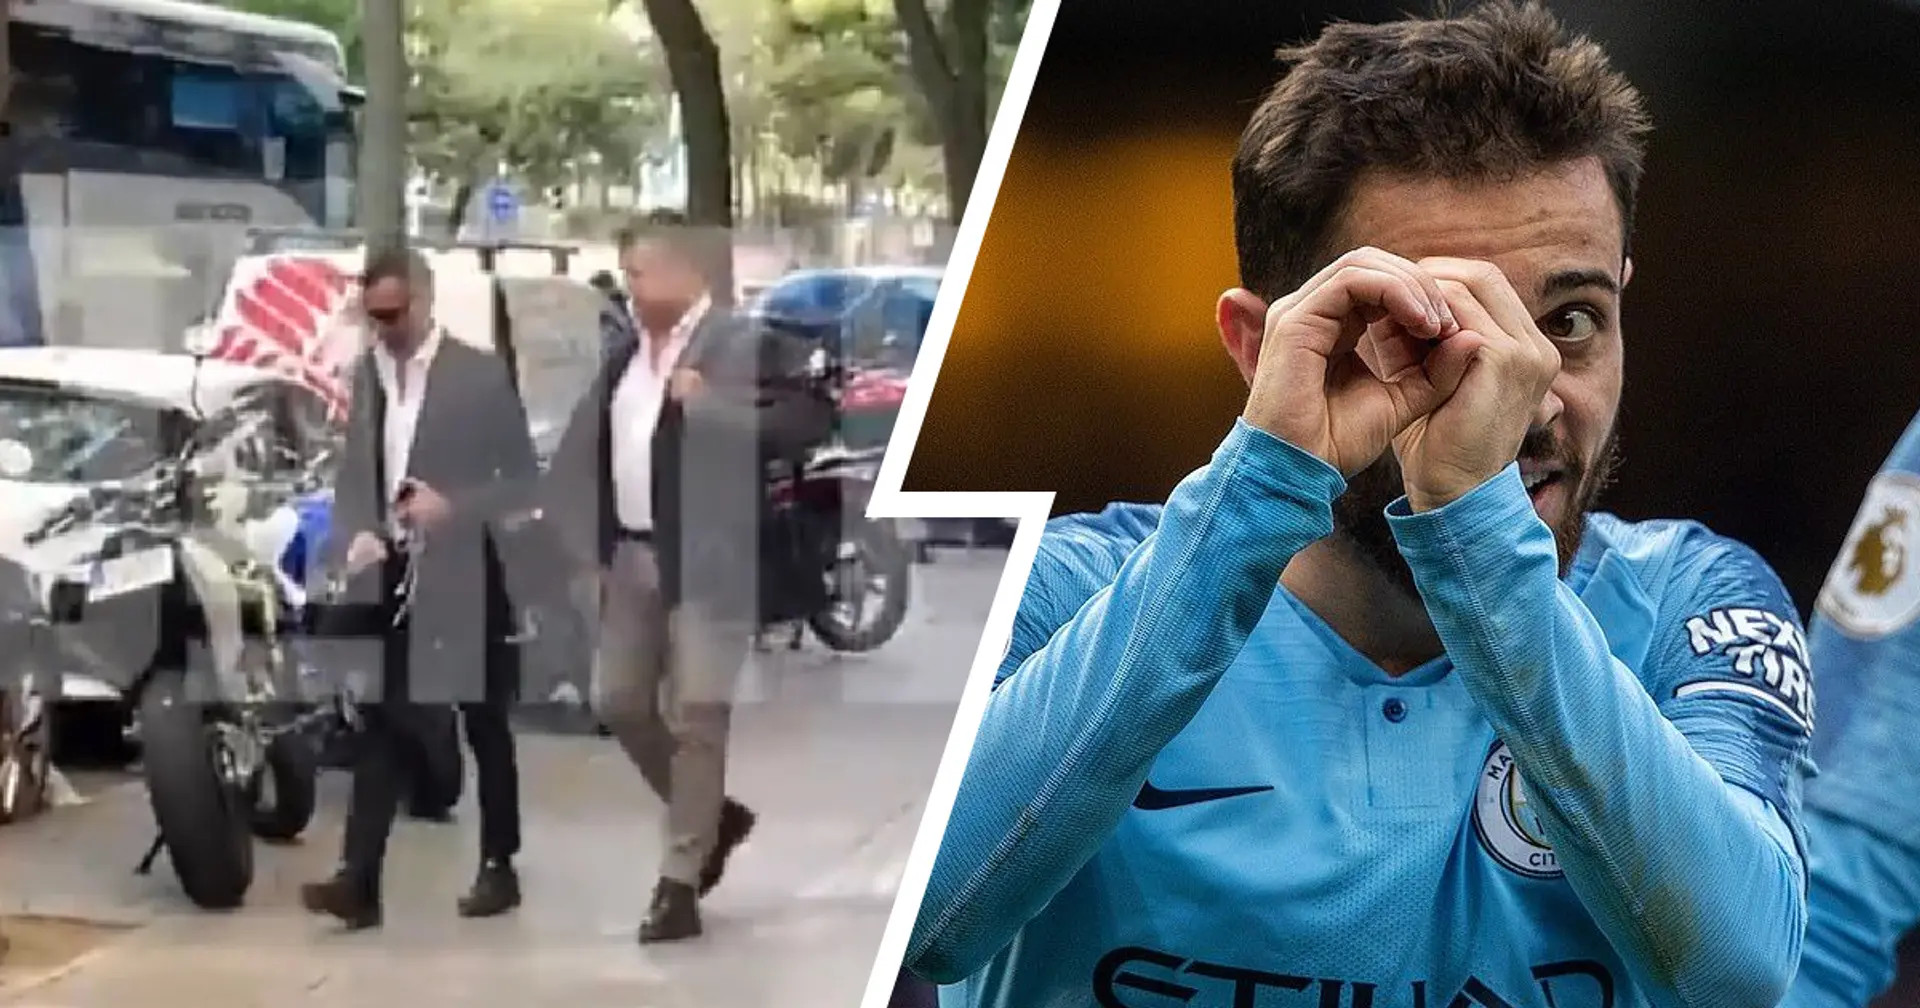 Joan Laporta spotted with Jorge Mendes in Barcelona – 2 players they likely discussed 